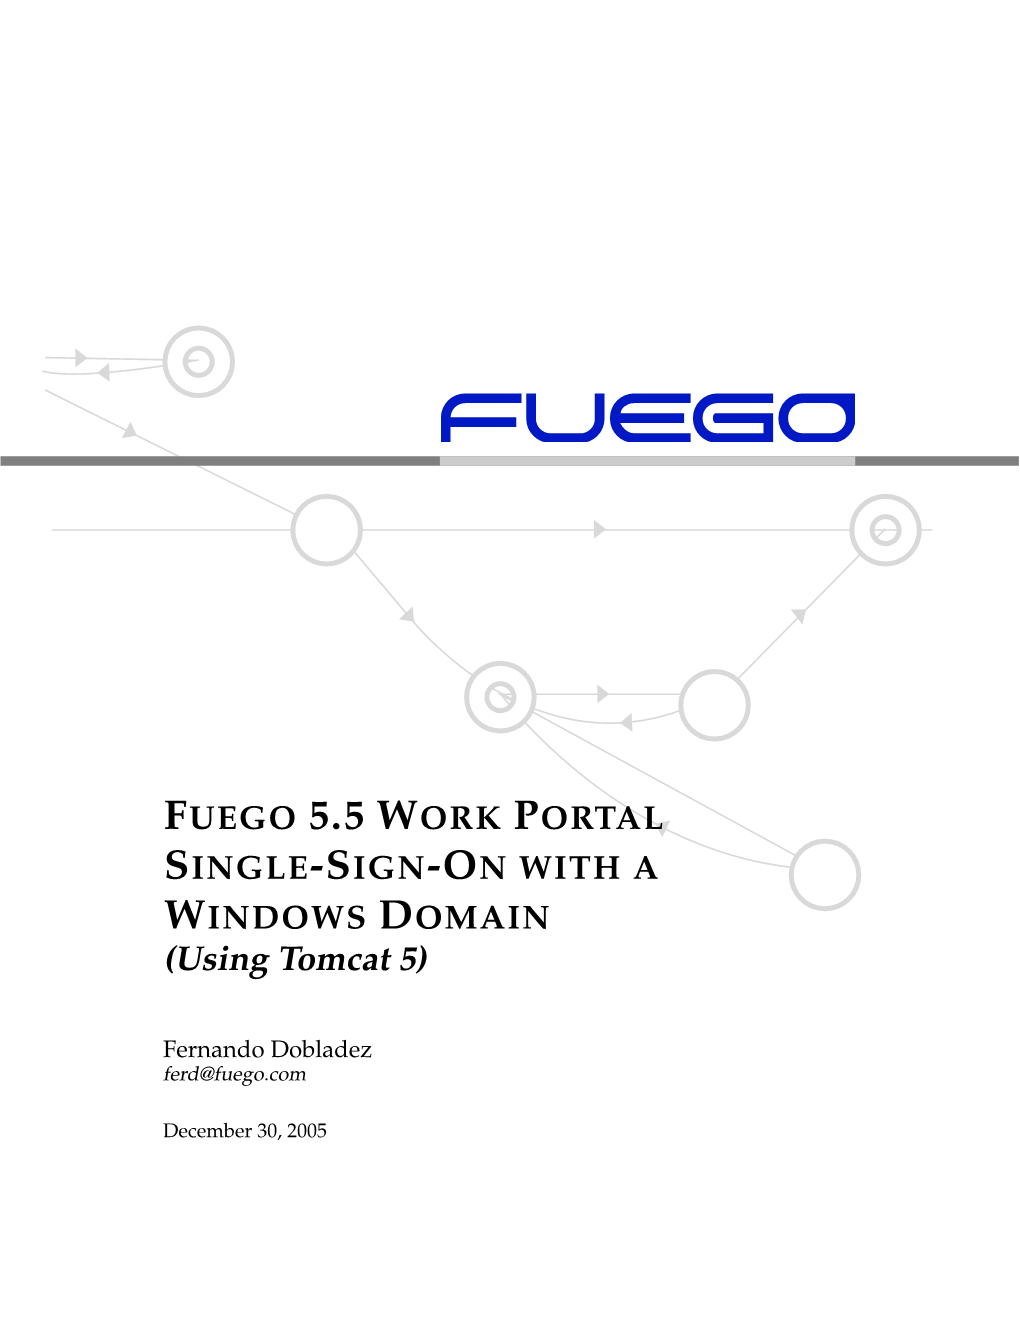 Fuego Work Portal Single-Sign-On with a Windows Domain